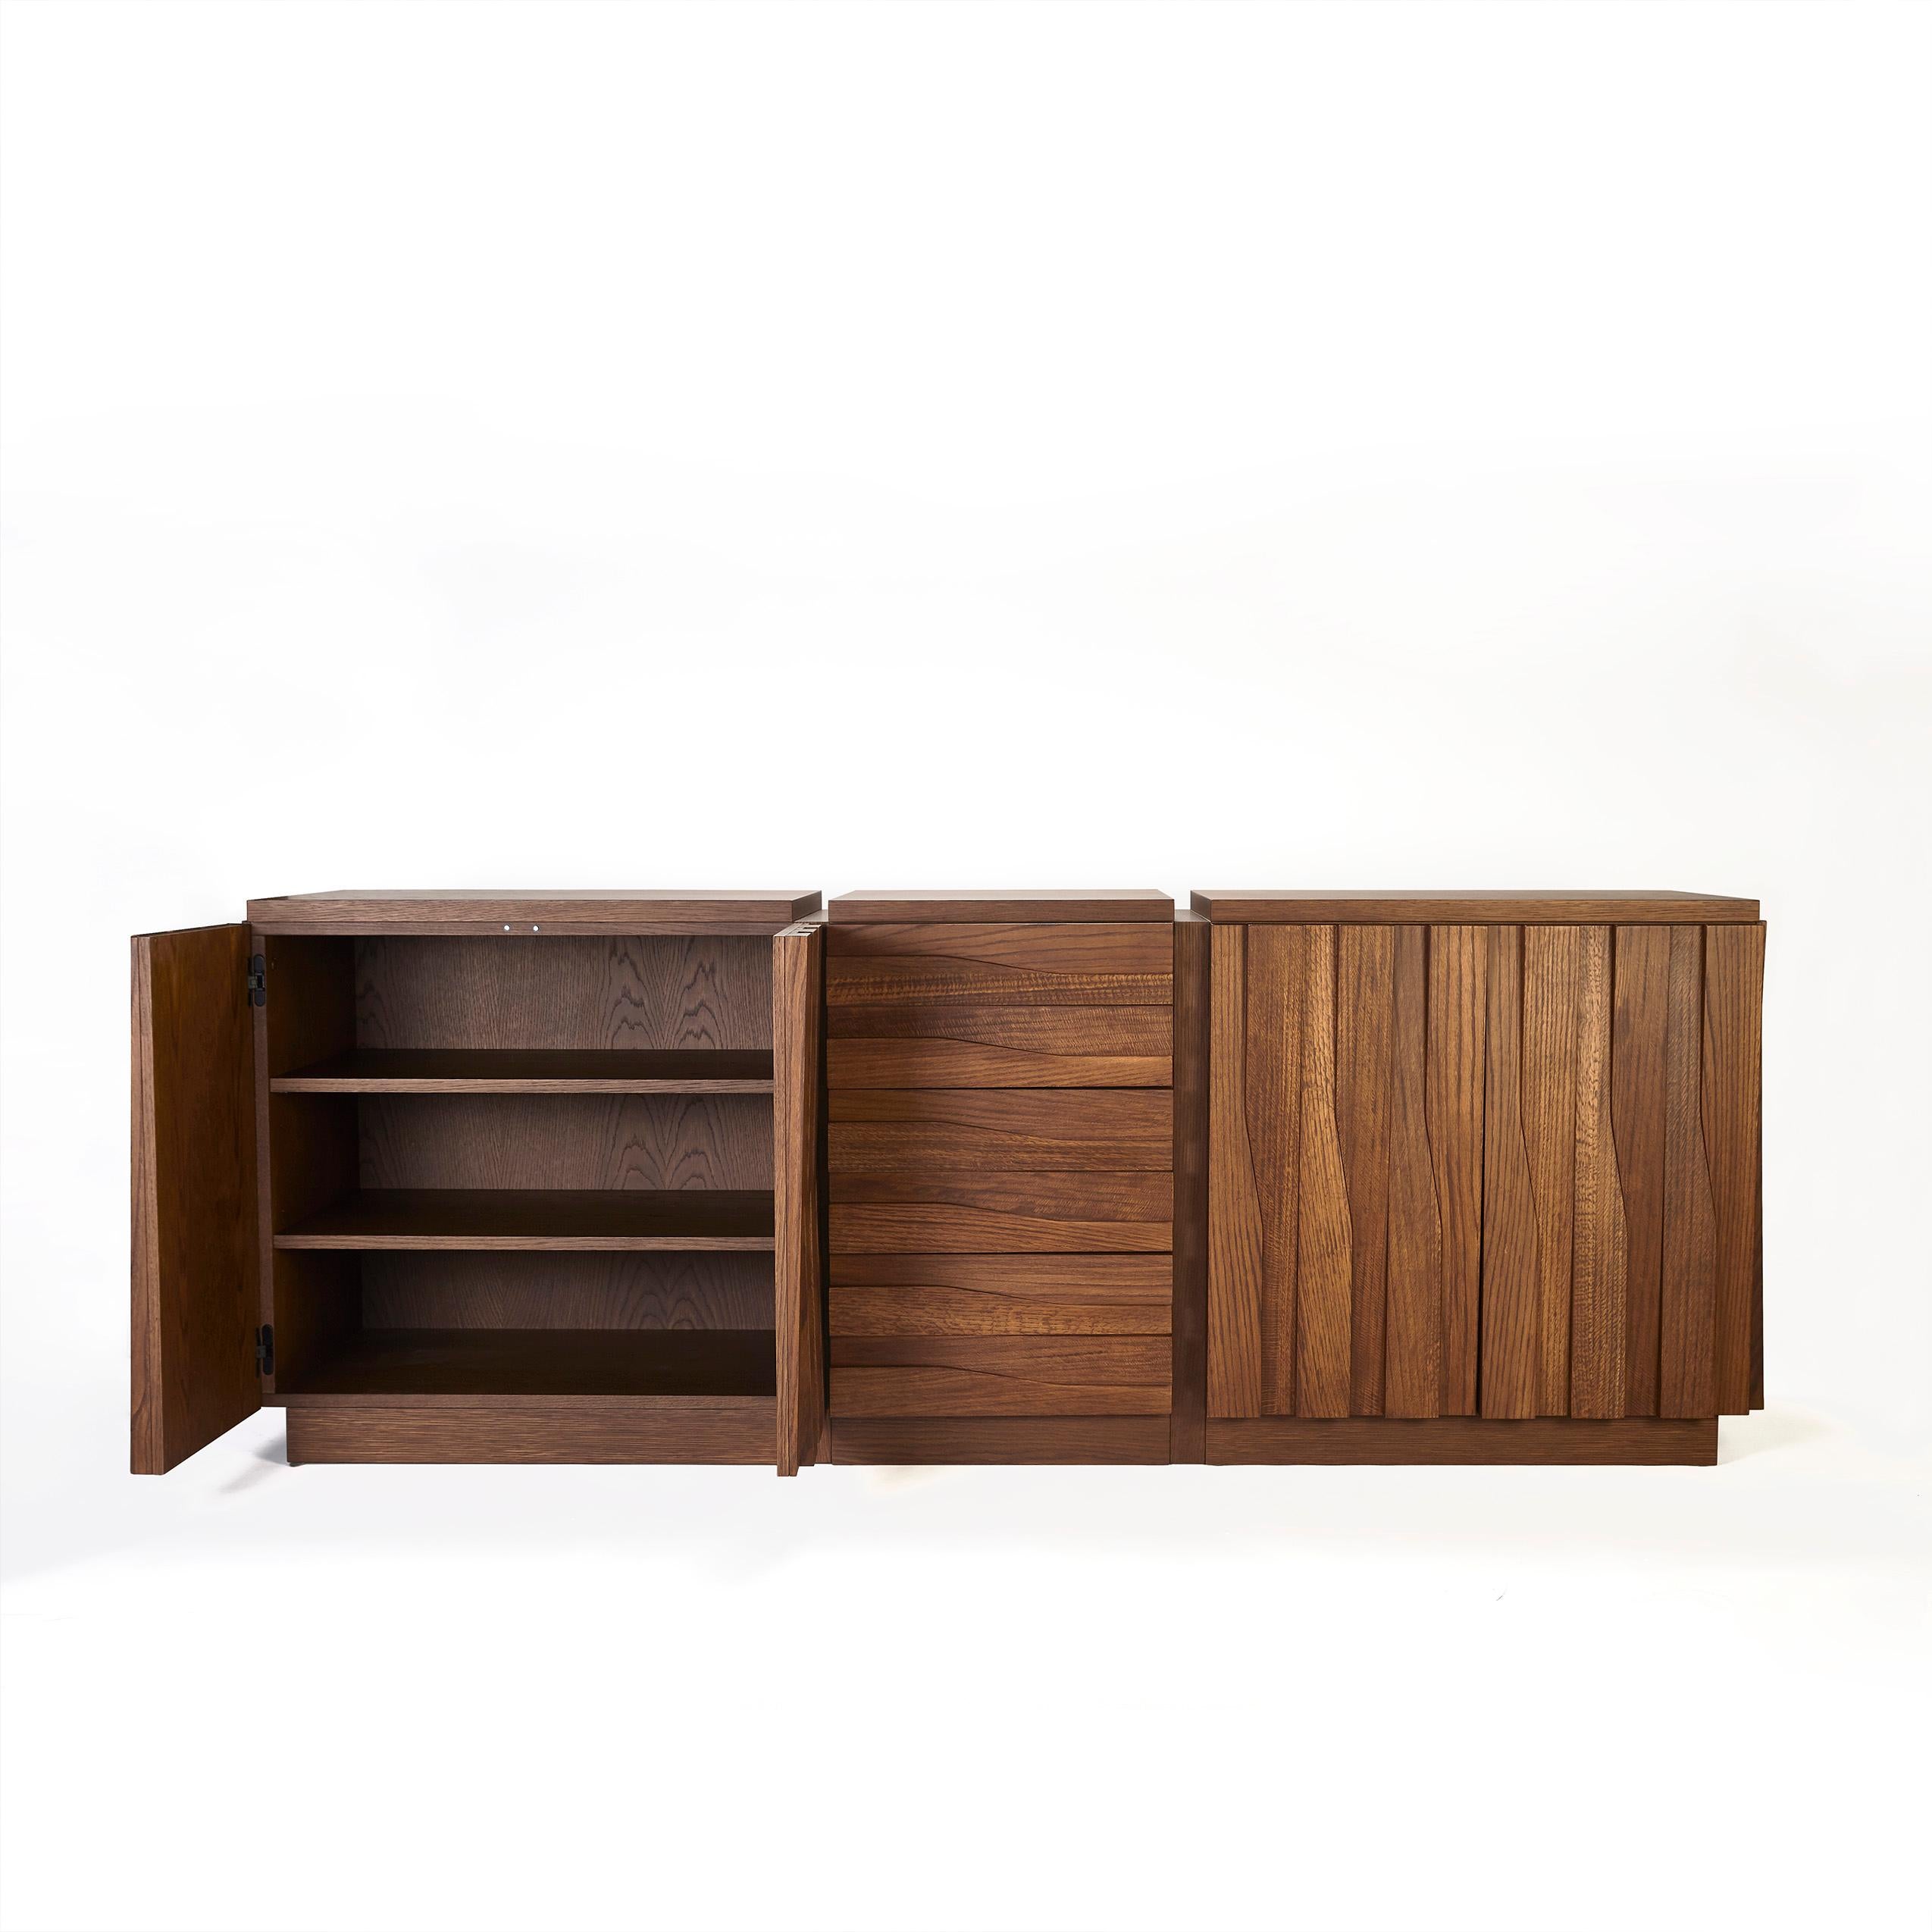 Portuguese Jacaranda Sideboard, in Stained Oak Wood, Handcrafted in Portugal by Duistt For Sale